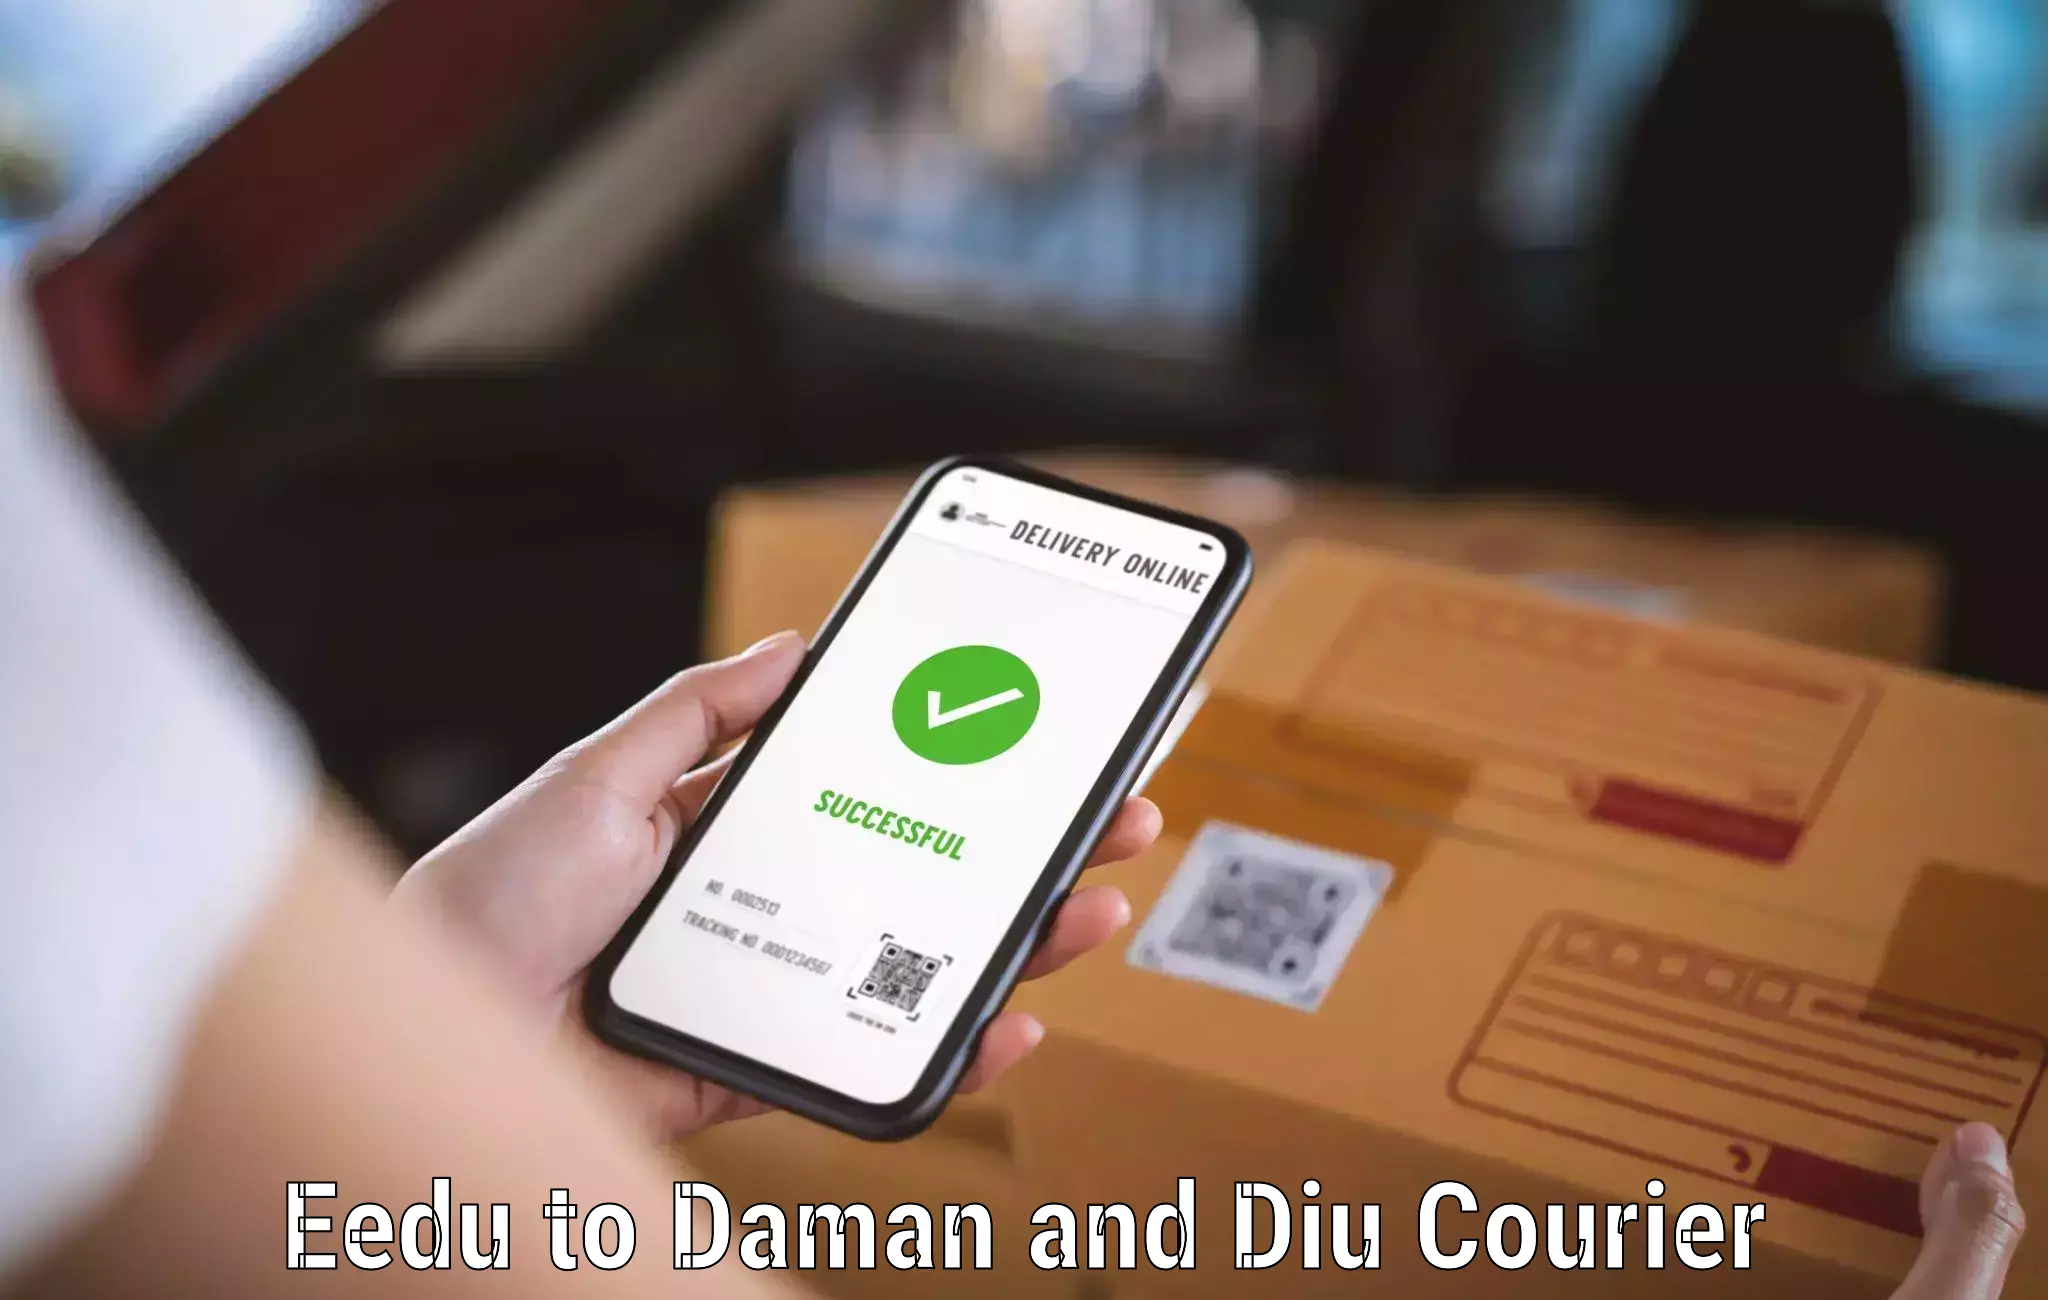 Parcel handling and care Eedu to Daman